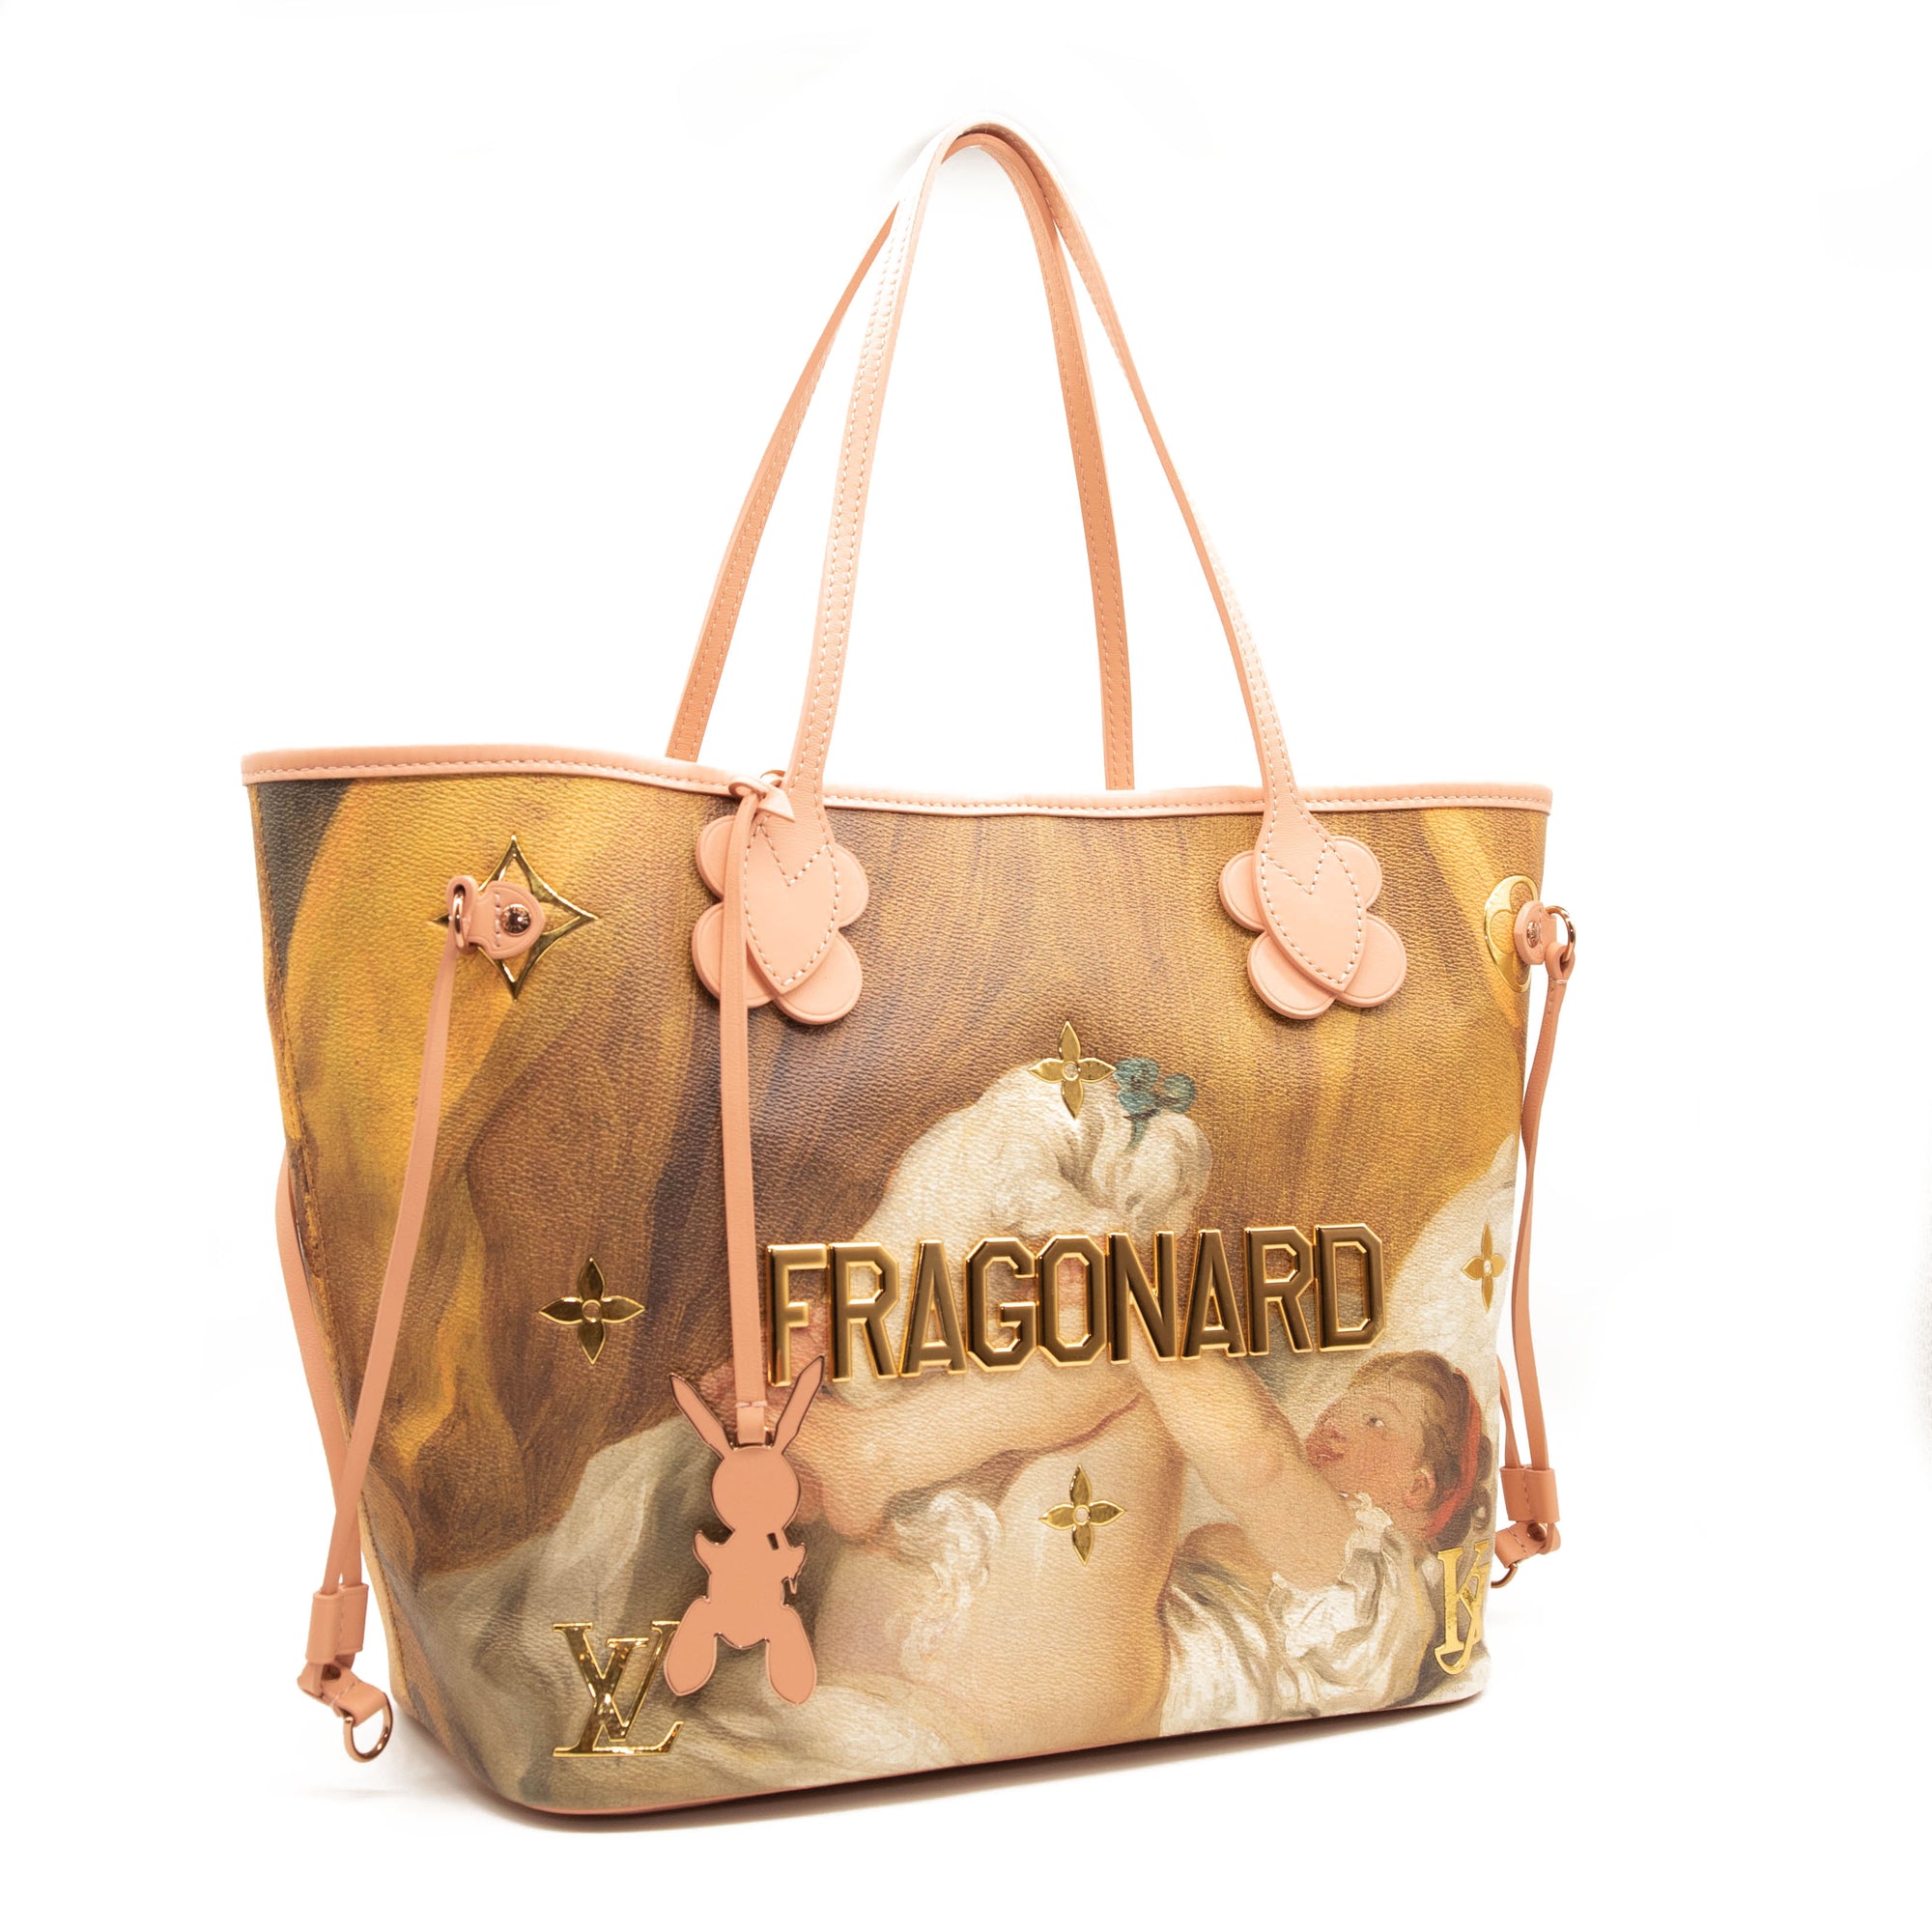 Louis Vuitton - Presenting Fragonard from the Masters